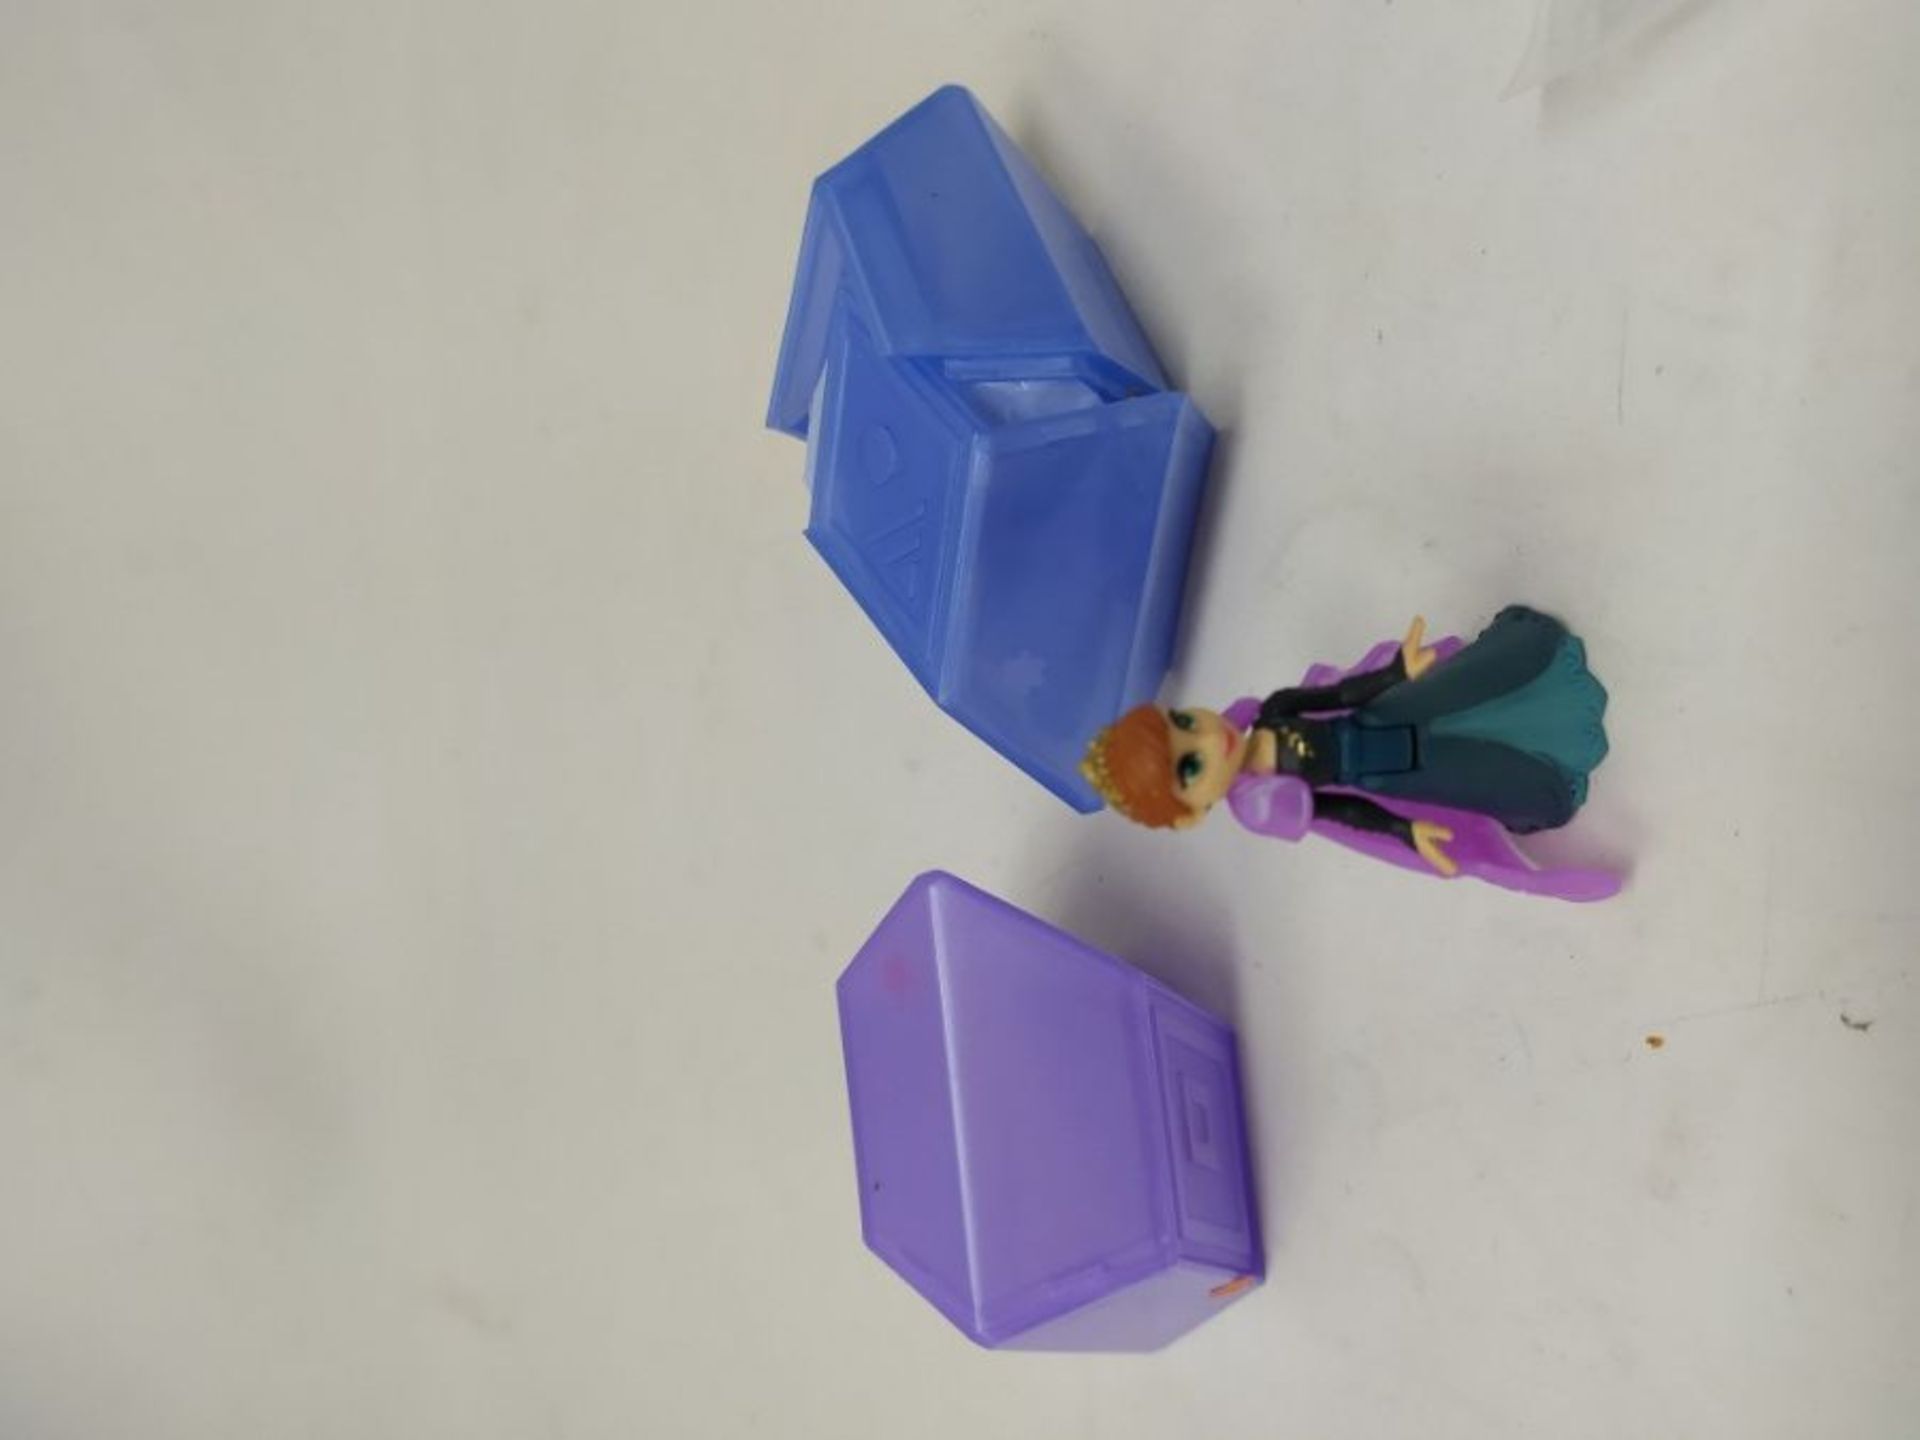 Disney Frozen 2 Pop Adventures Series 1 Surprise Blind Box With Crystal-Shaped Case an - Image 2 of 2